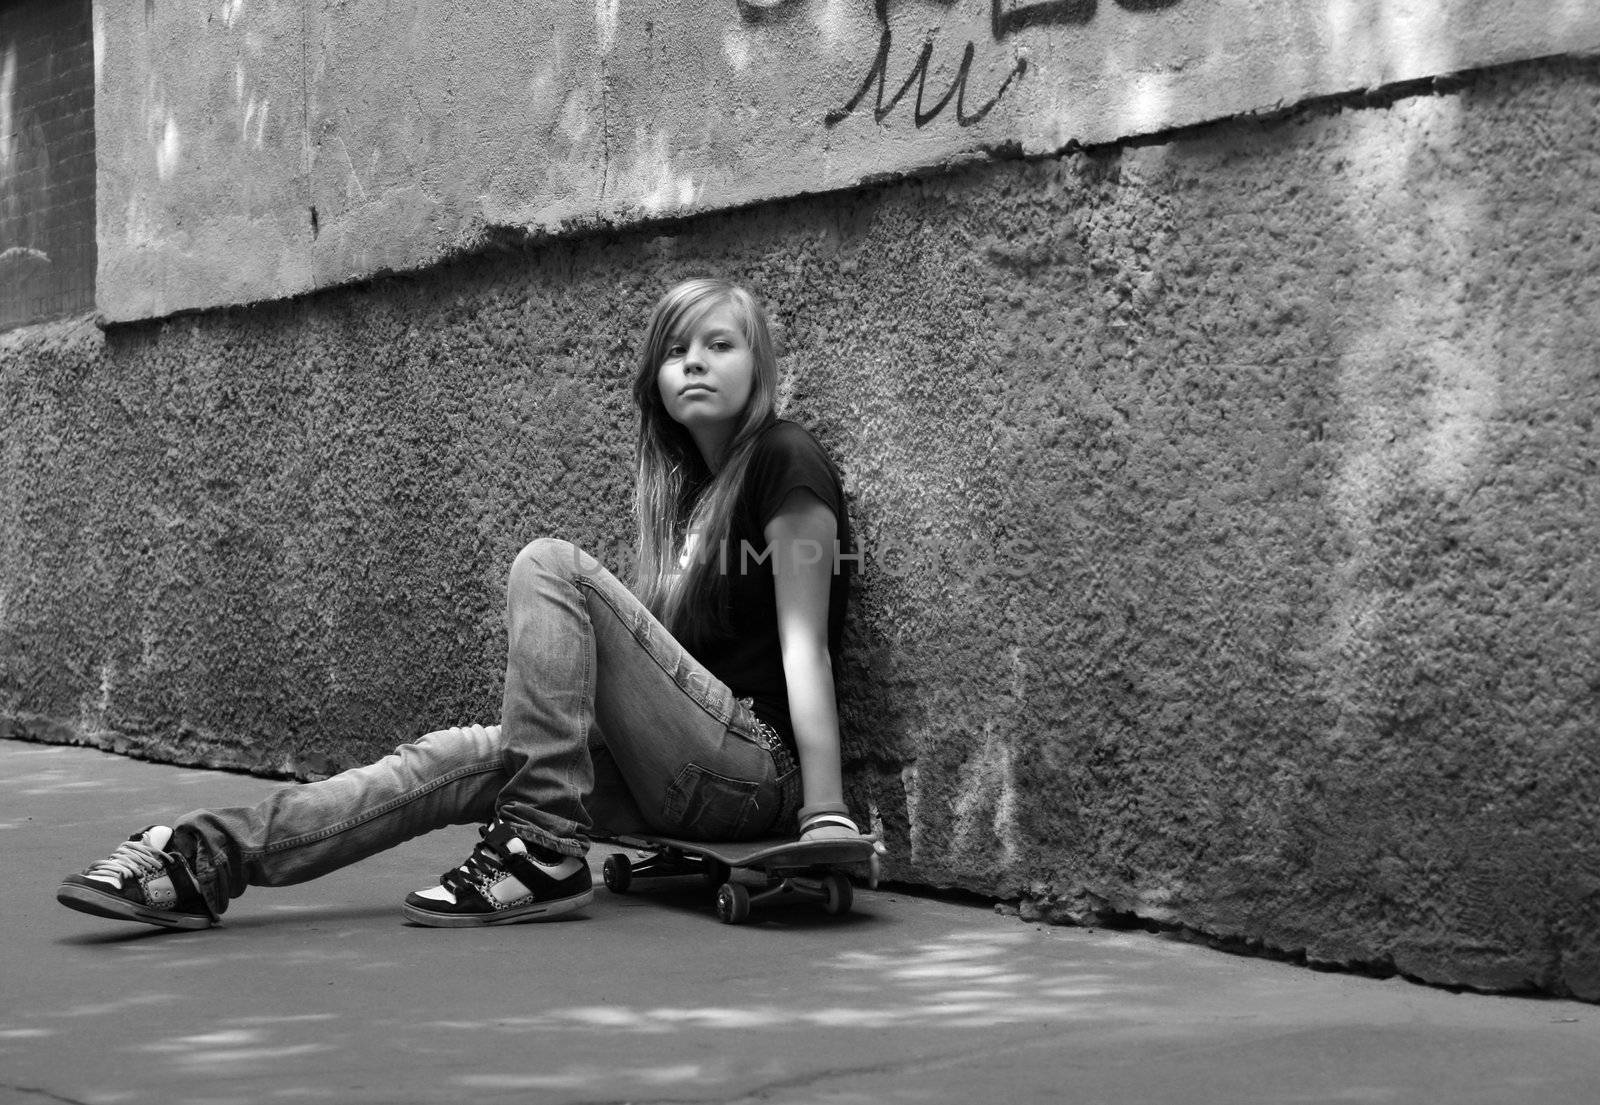 The girl with skateboard